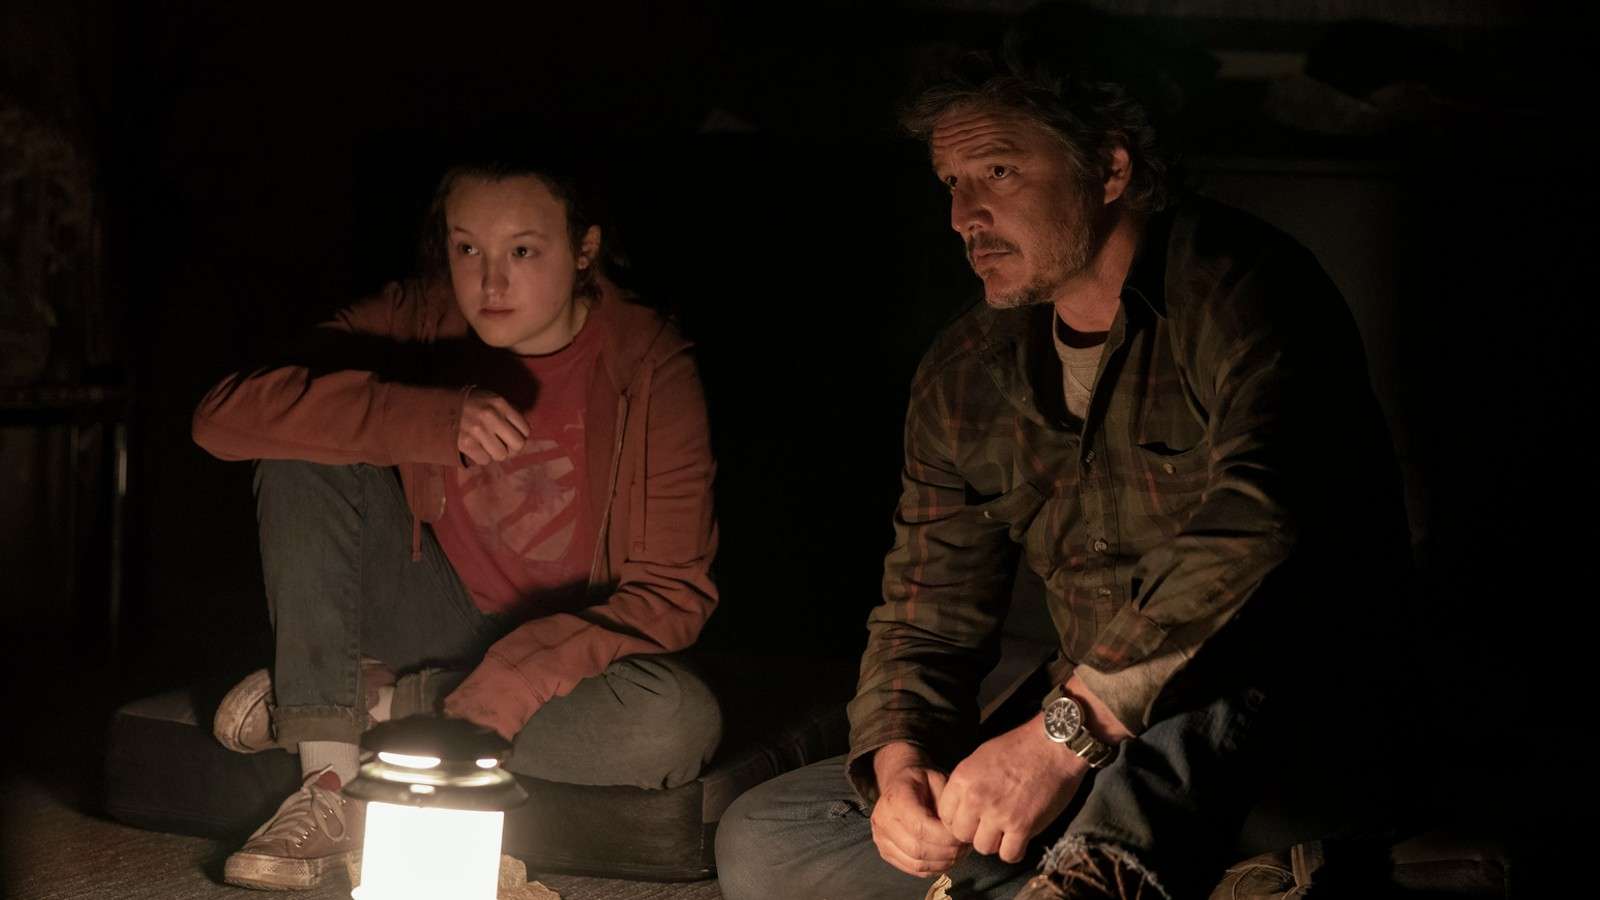 Bella Ramsey and Pedro Pascal in The Last of Us Episode 5